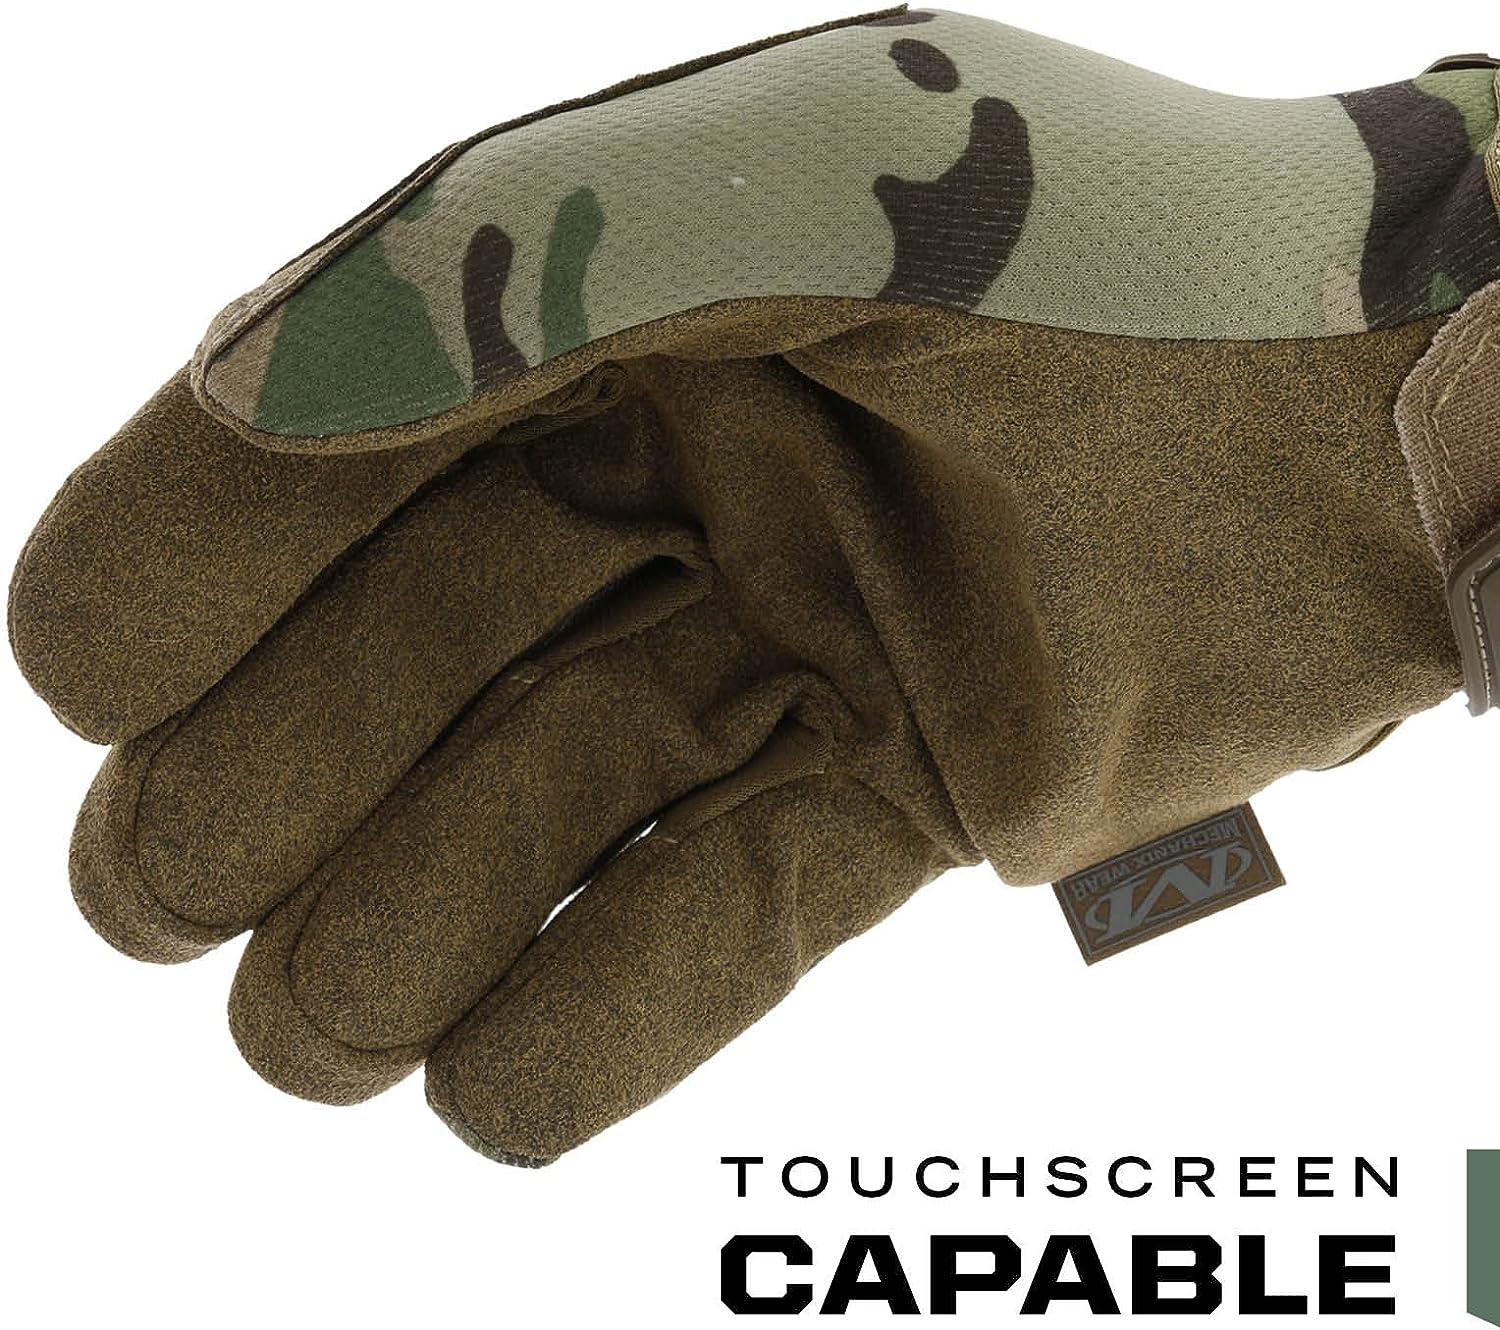 Mechanic Work Gloves Breathable Camo hunting Gloves Leather Palm